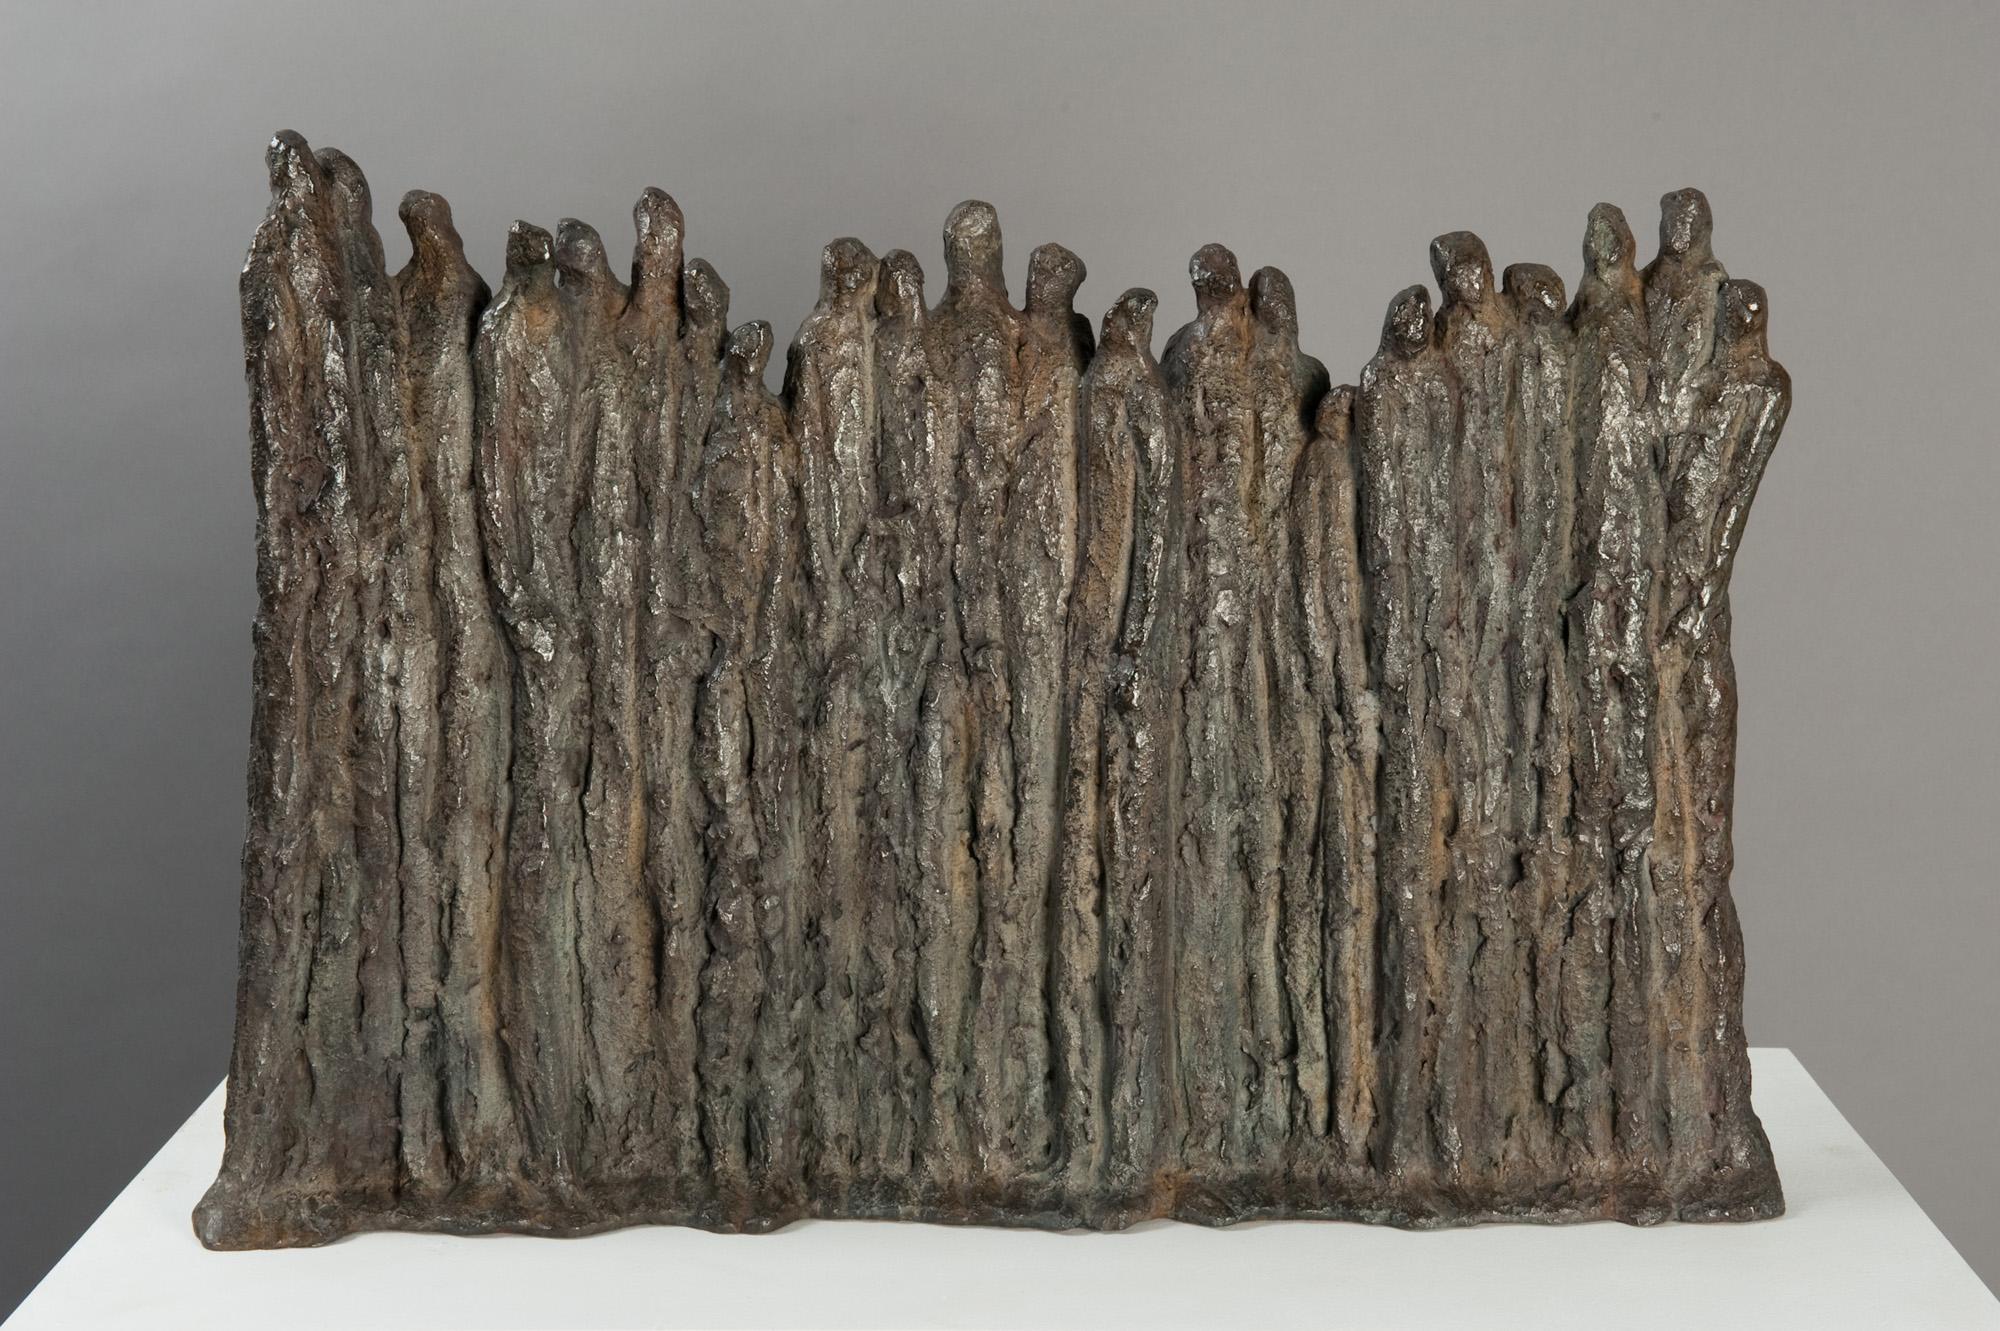 Wall is a bronze sculpture by contemporary artist Delphine Brabant, dimensions are 37 × 56 × 7 cm (14.6 × 22 × 2.8 in). 
The sculpture is signed and numbered, it is part of a limited edition of 8 editions and comes with a certificate of